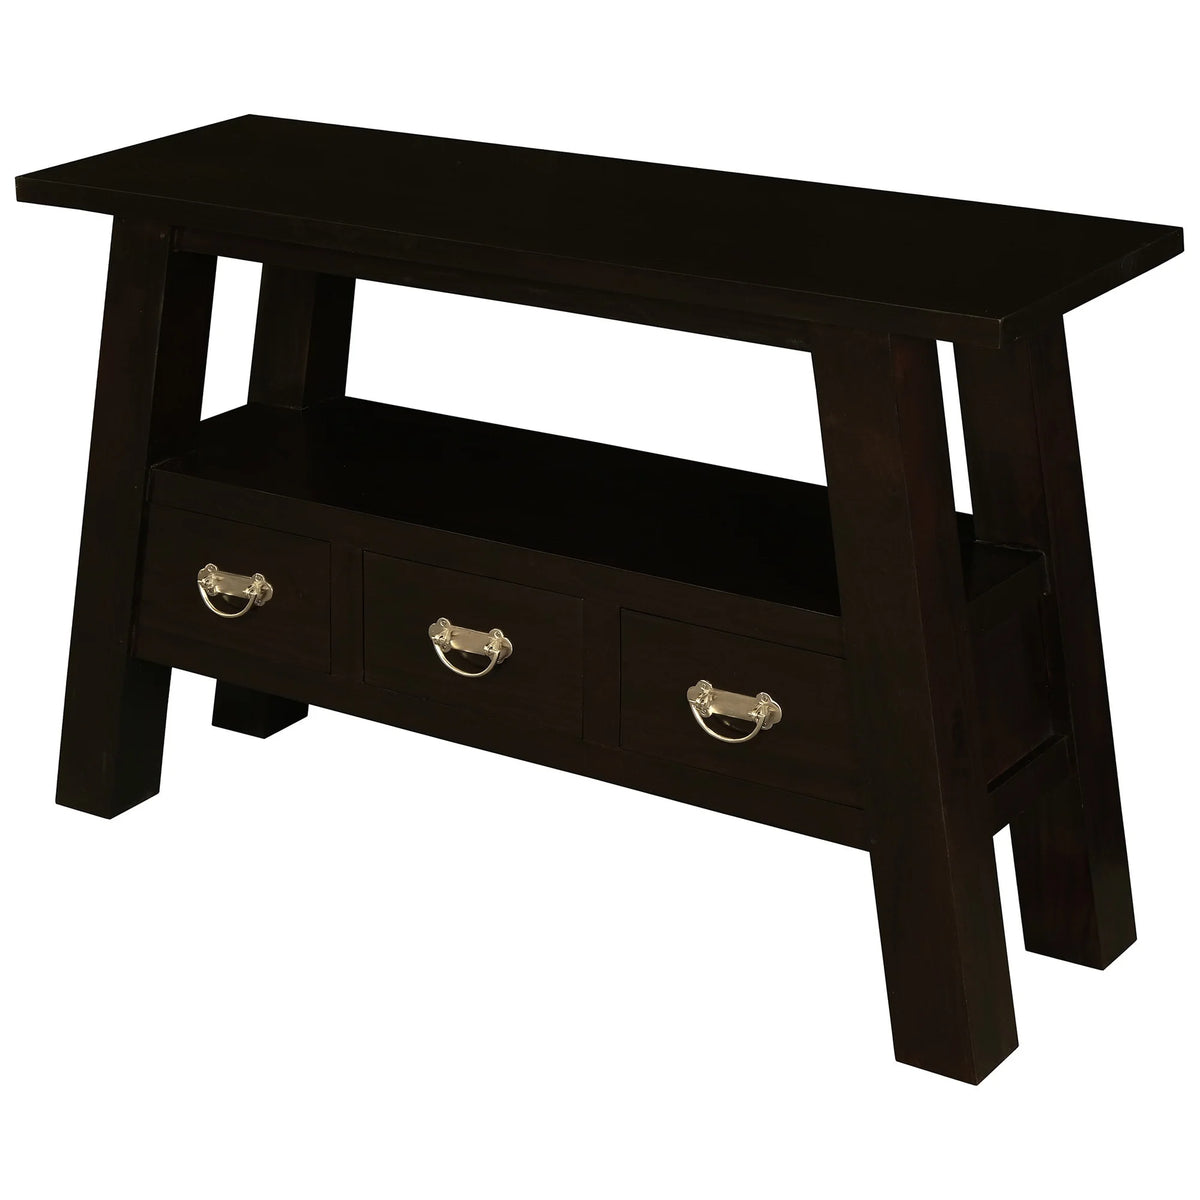 Zimra Timber 3 Drawer Console Table - Chocolate - Notbrand